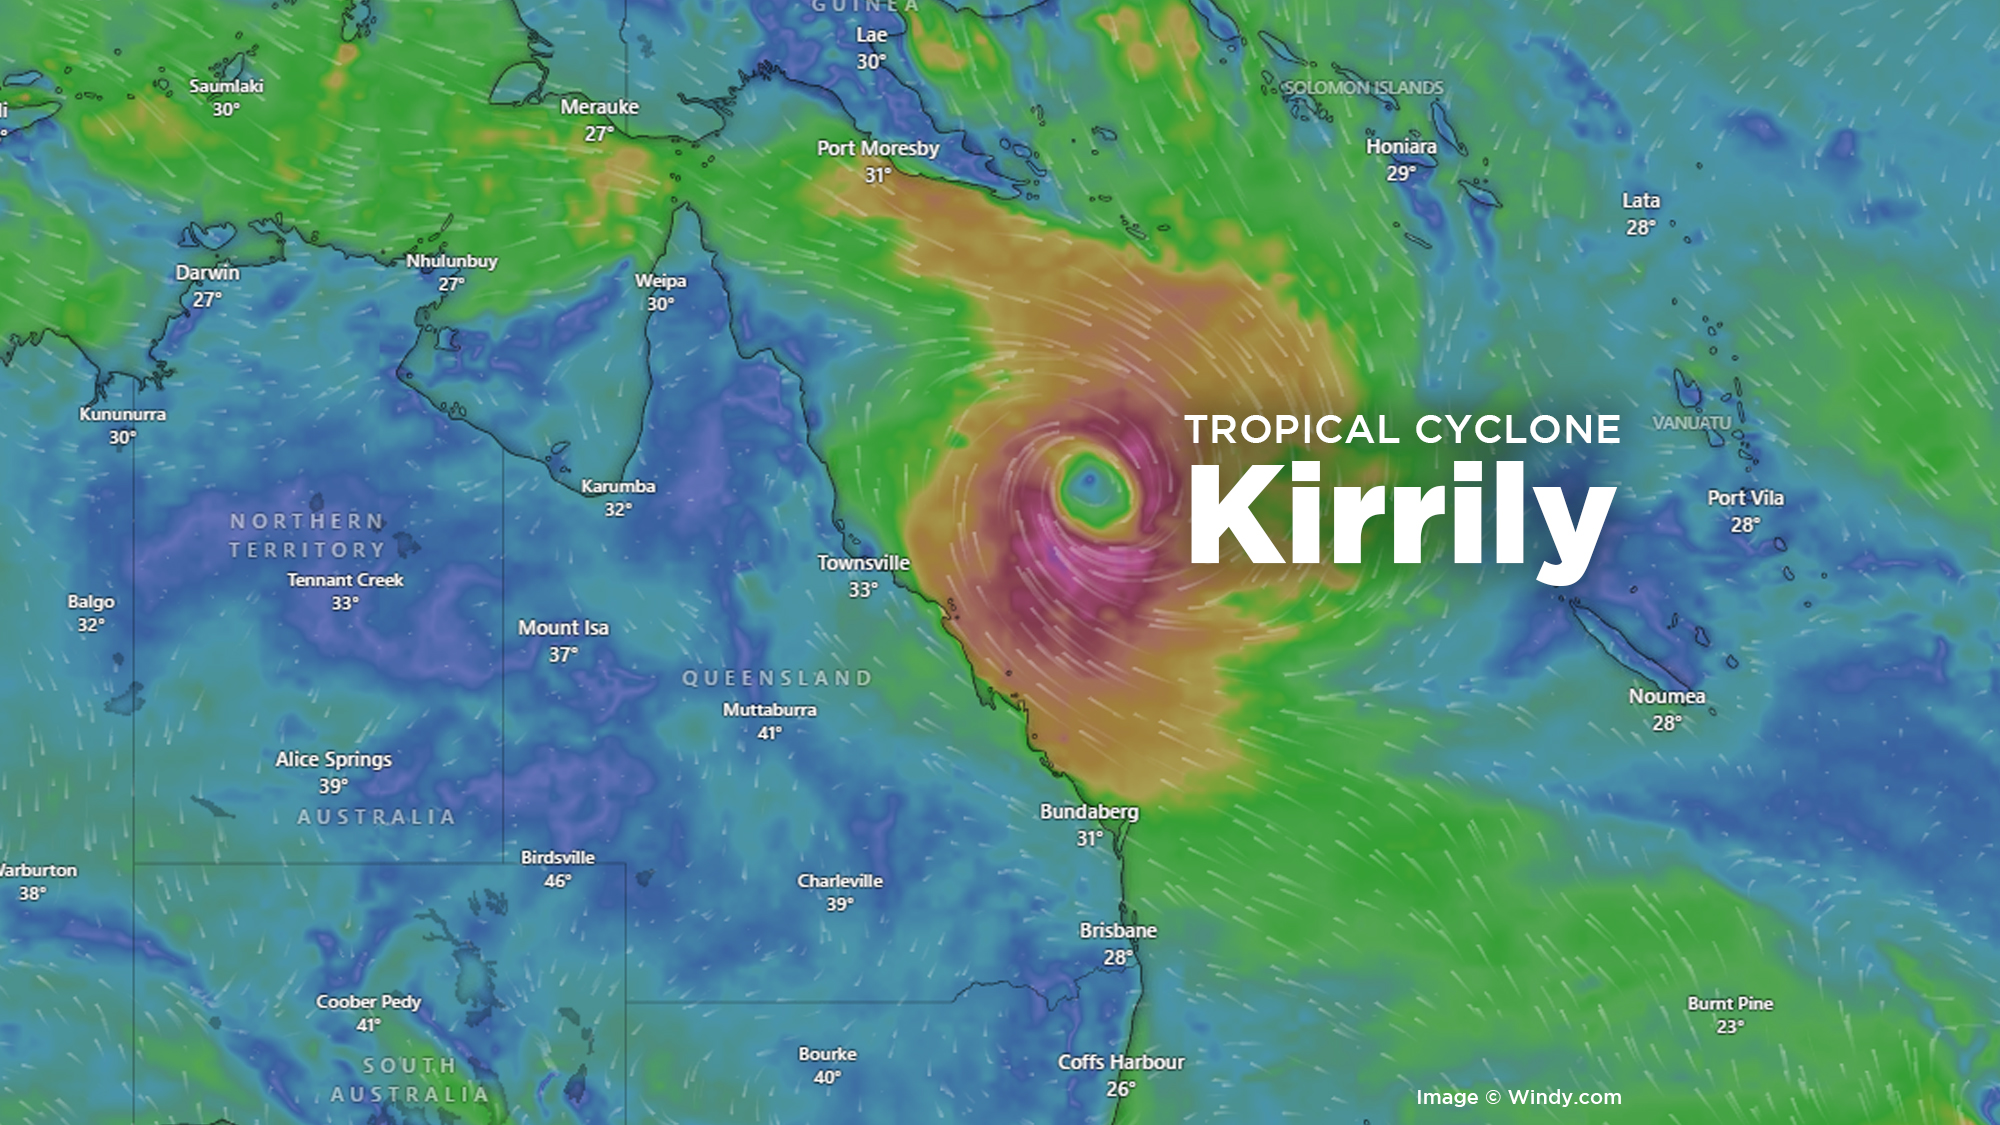 Cyclone Kirrily off cost of Queensland showing on a satellite image